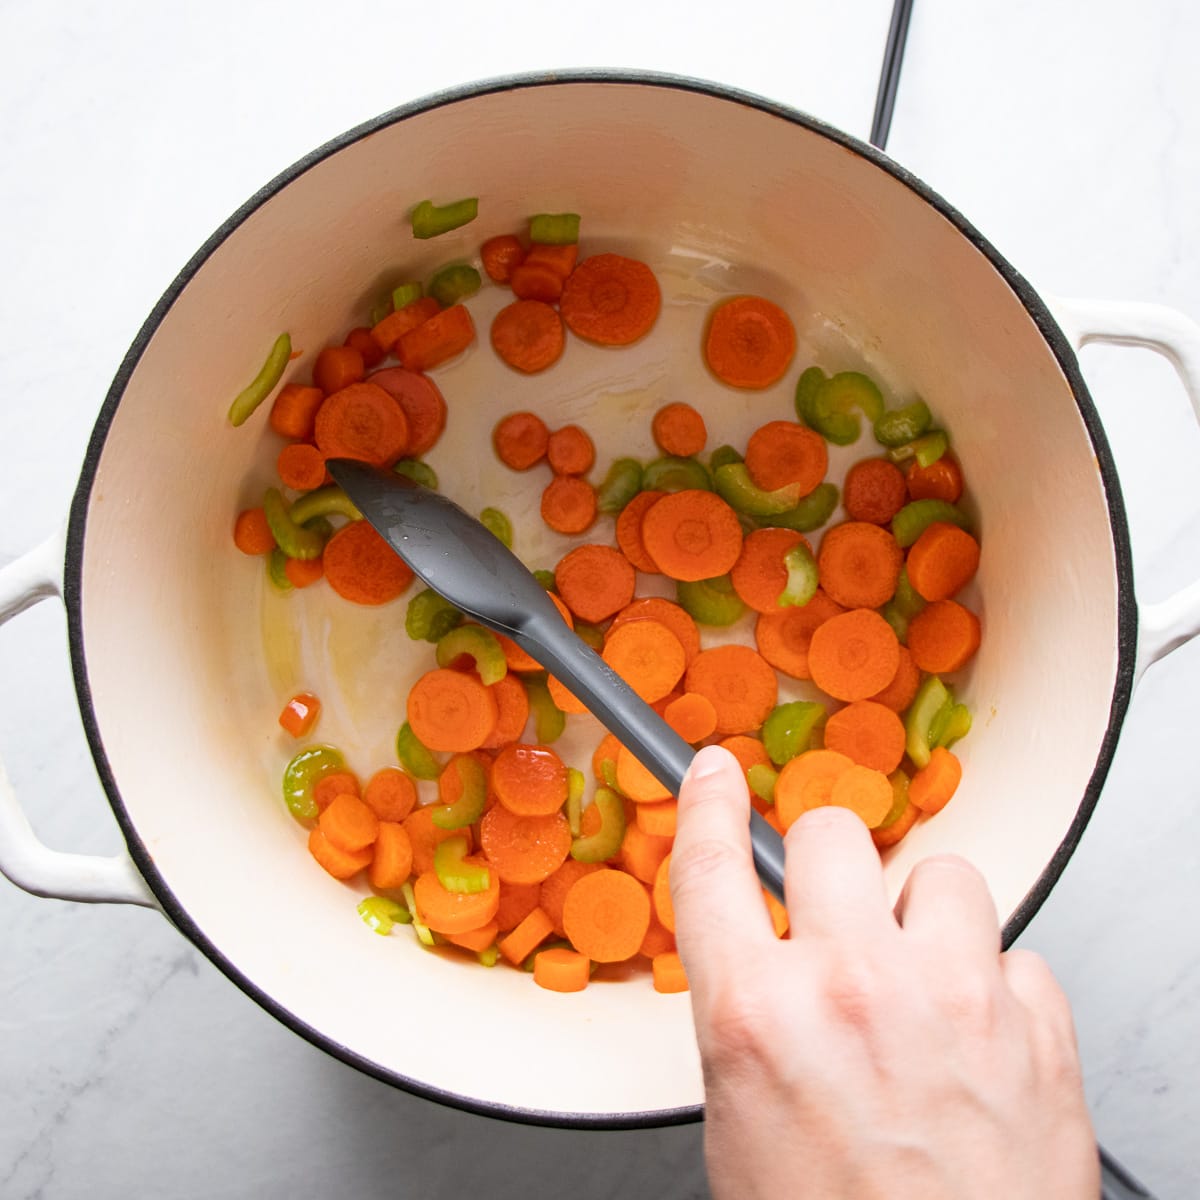 Stirring carrot coins and celery pieces being sautéed in a white Dutch oven pot.